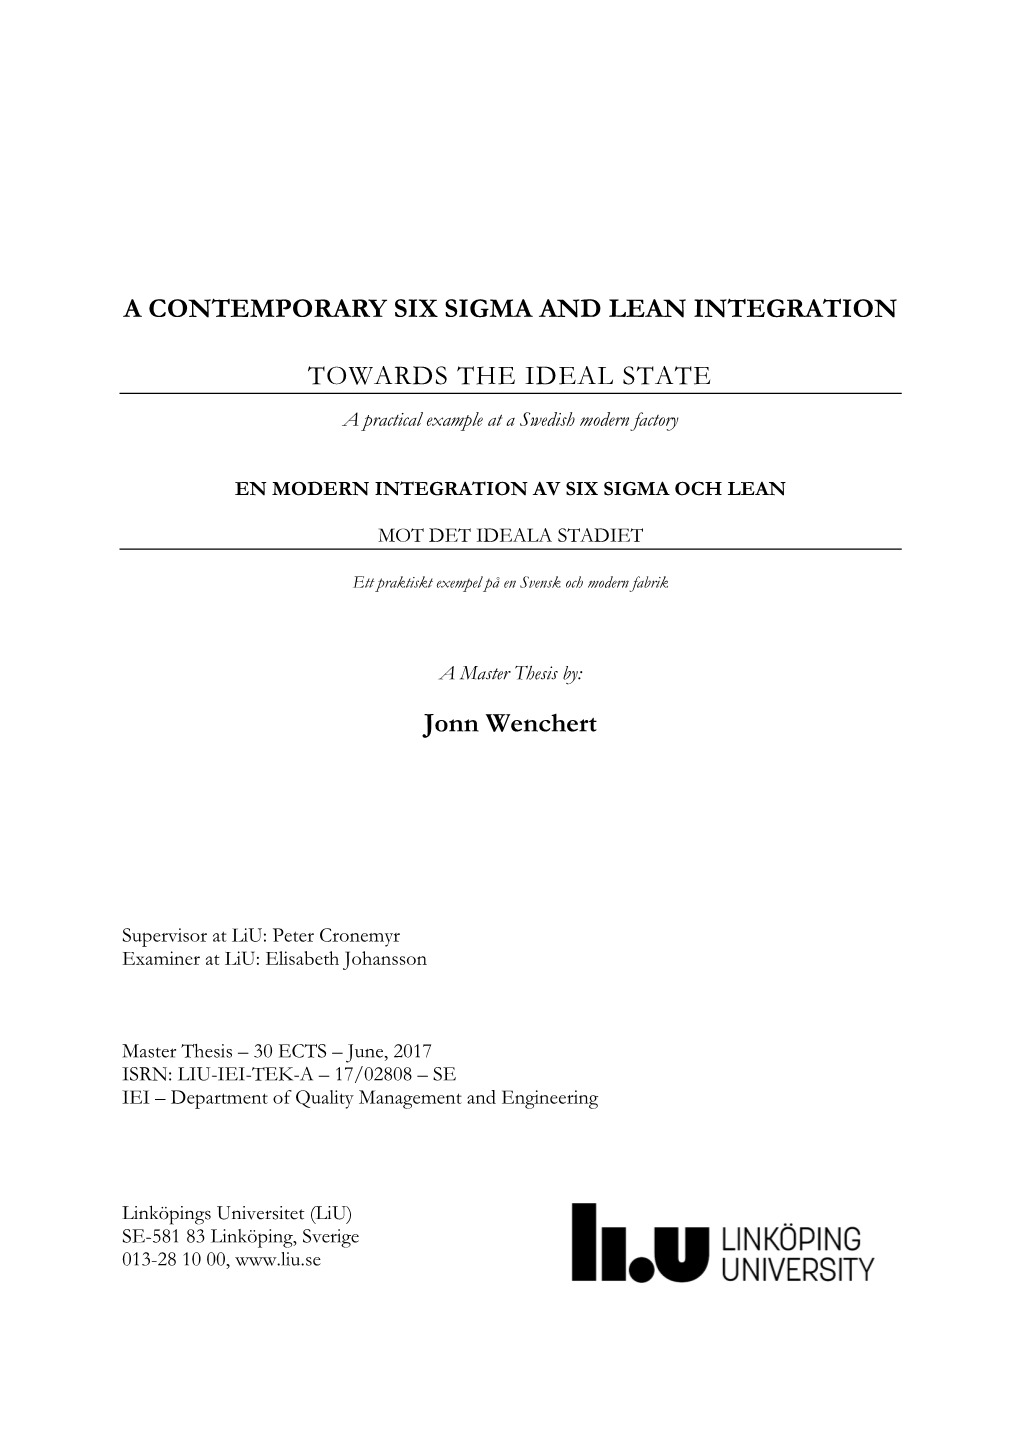 A Contemporary Six Sigma and Lean Integration Towards